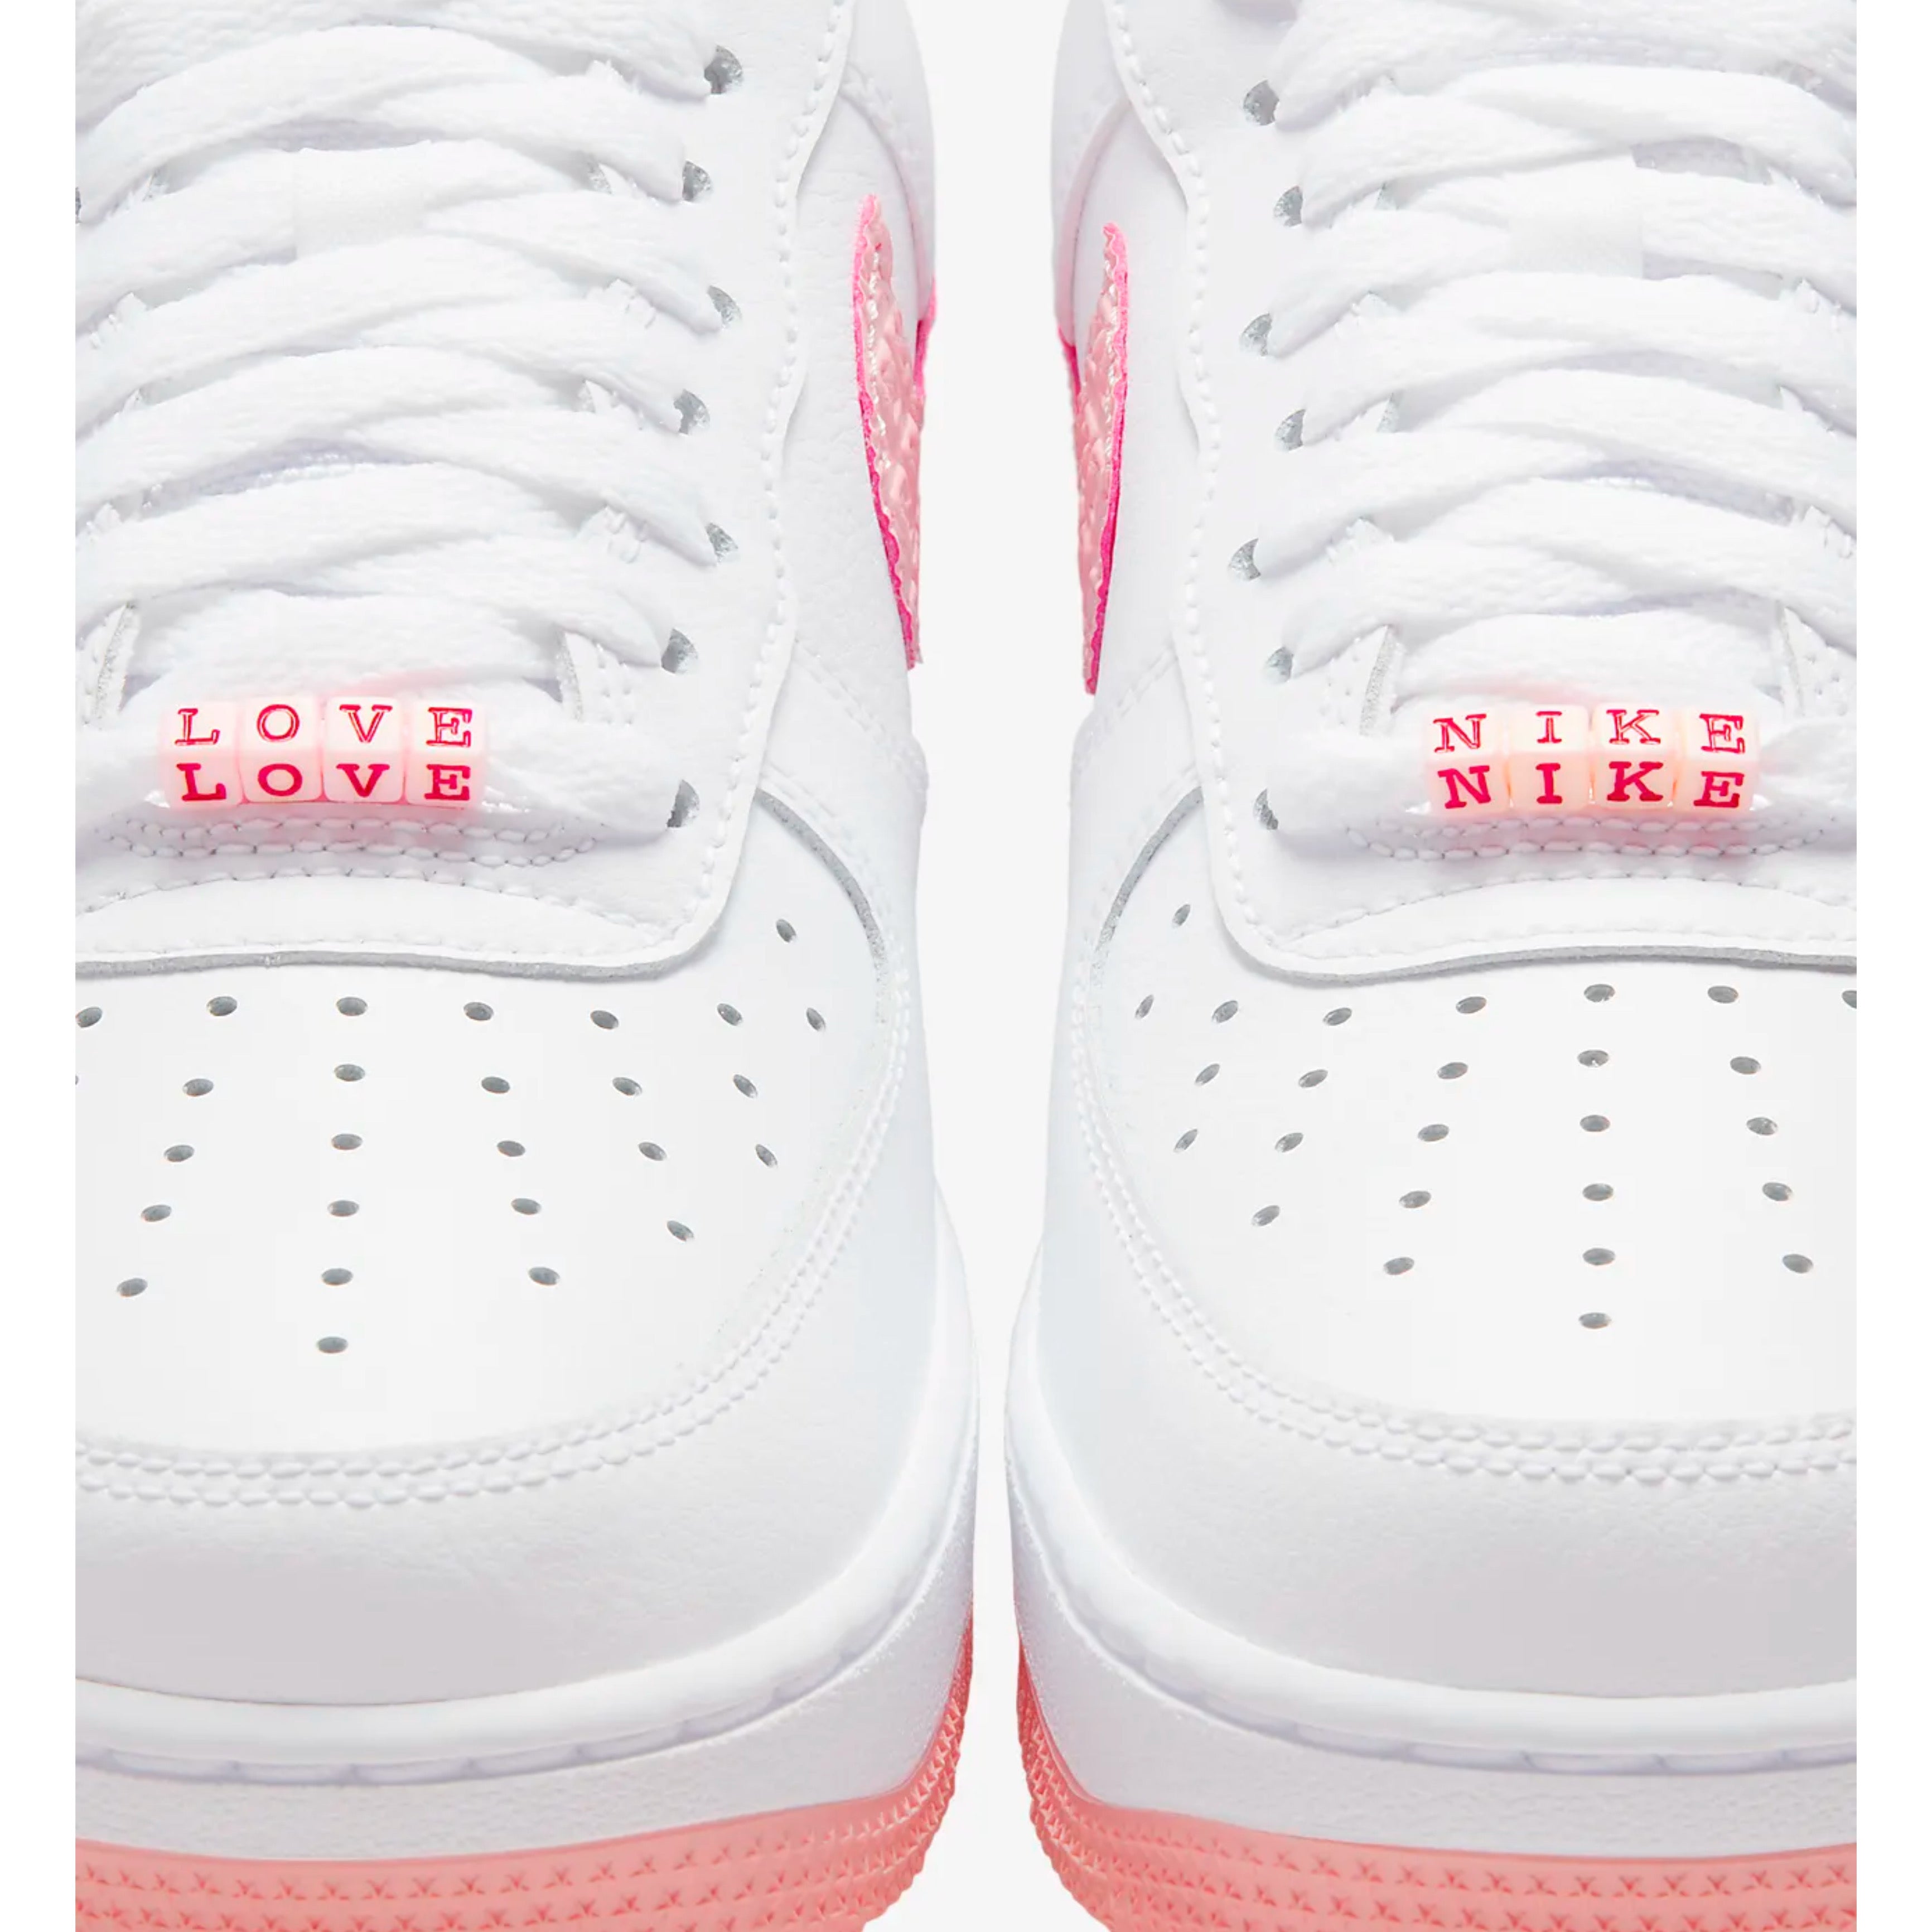 Nike airforce A1 valentines shoes